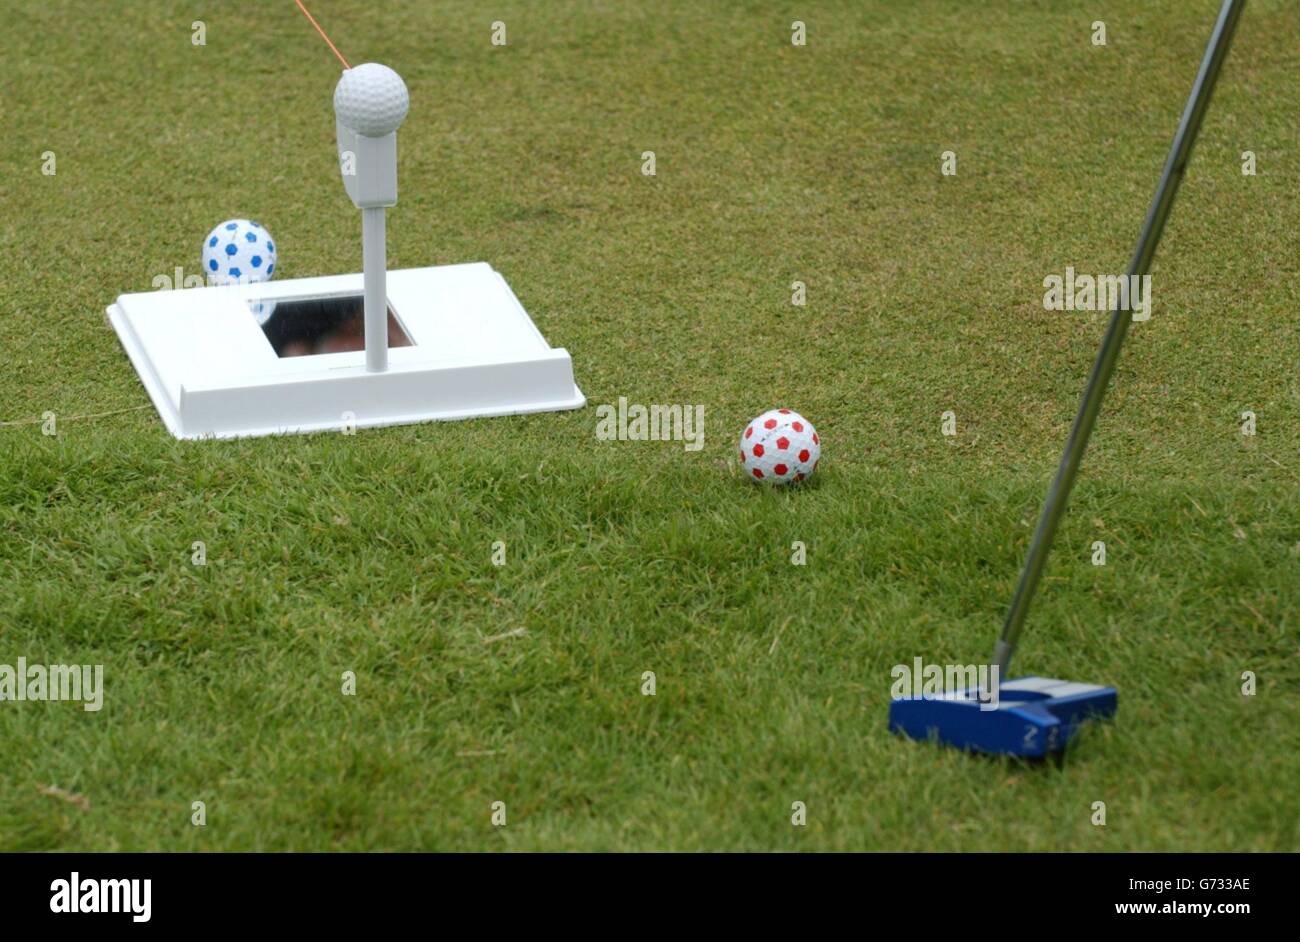 A putting aid on the practice putting green area for the 133rd Open Championship at the Royal Troon Golf Club, Scotland. , NO MOBILE PHONE USE. Stock Photo